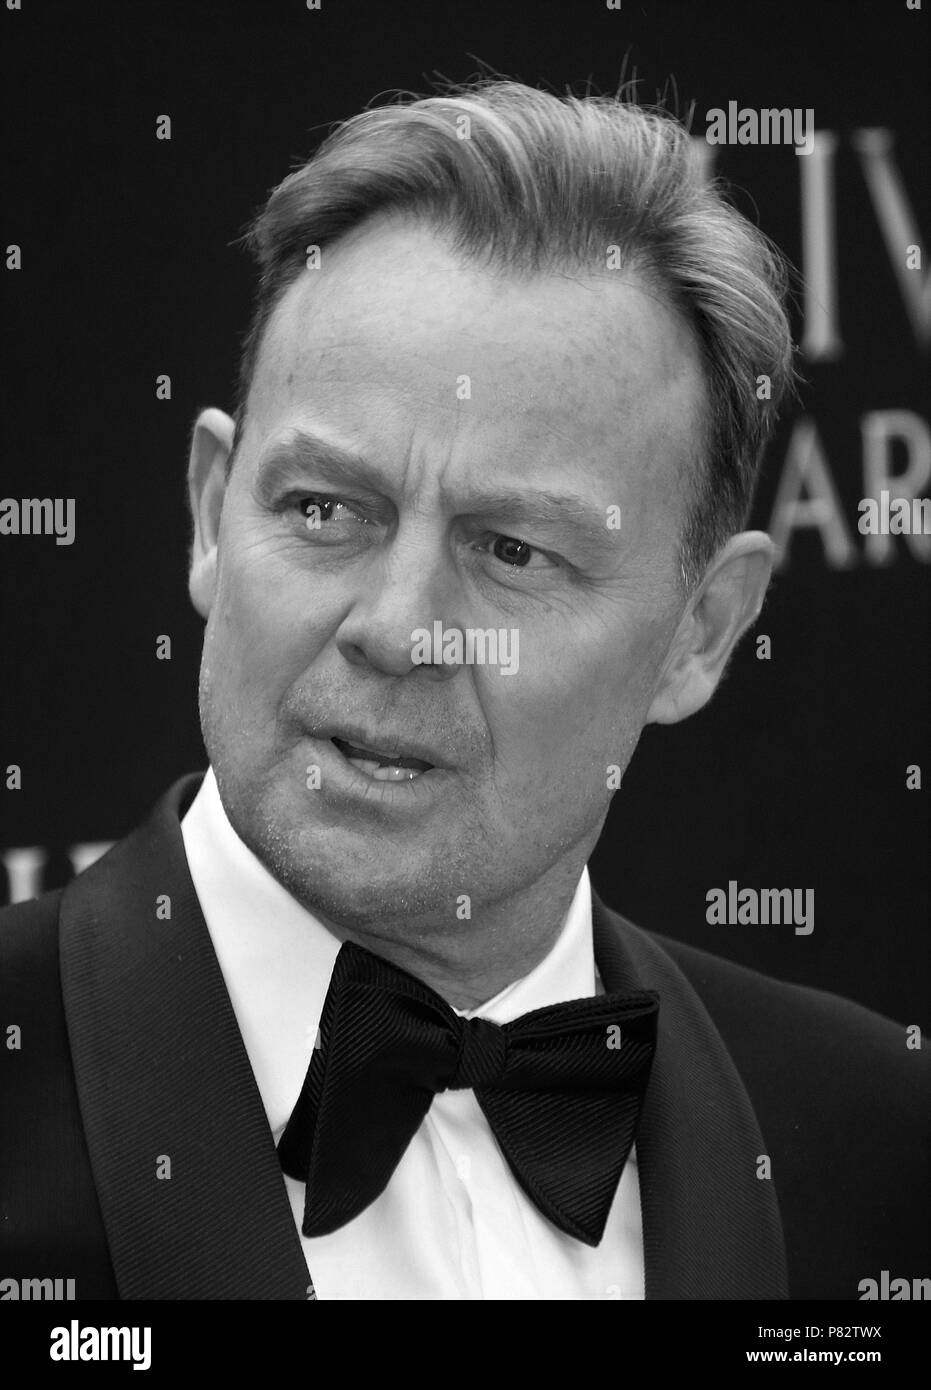 LONDON - APR 08, 2018: ( Image digitally altered to monochrome ) Jason Donovan attends The Olivier Awards at the  Royal Albert Hall Stock Photo